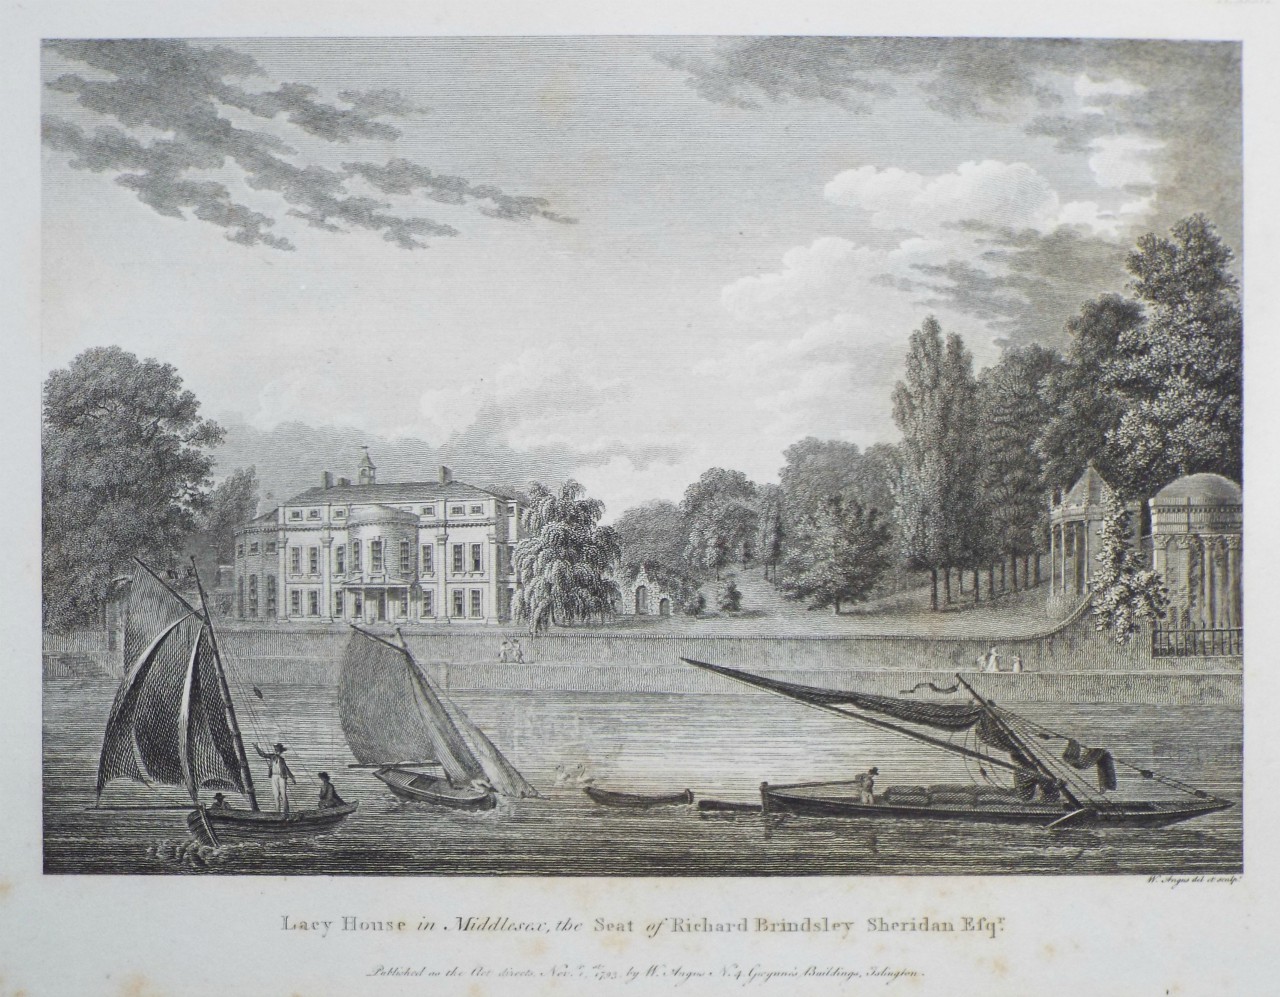 Print - Lacy House in Middlesex, the Seat of Richard Brindsley Sheridan Esqr. - Angus